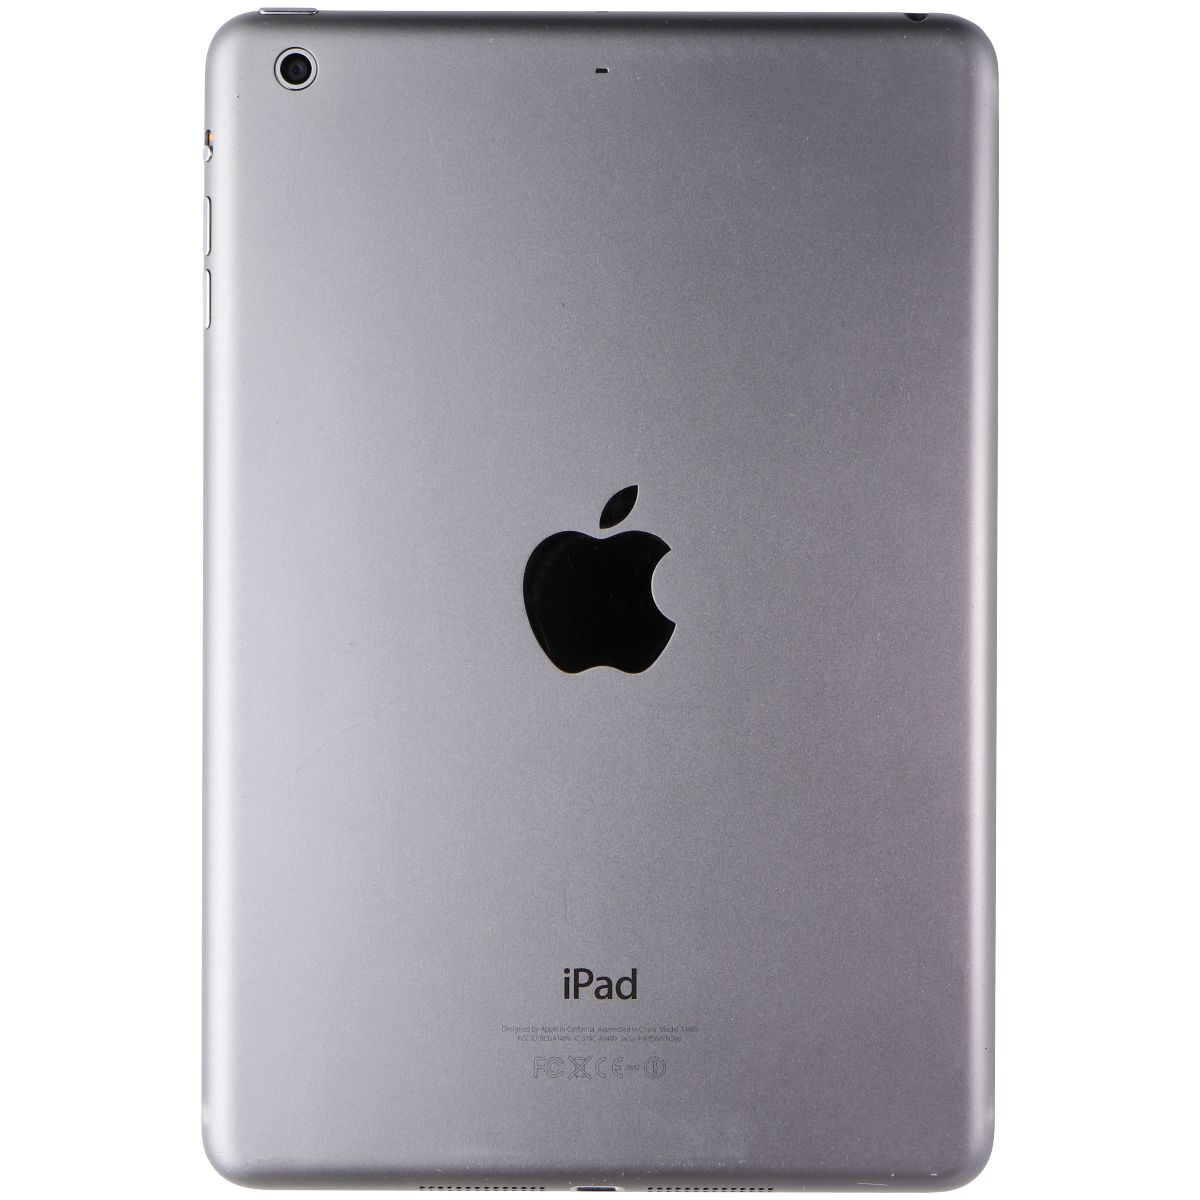 Apple iPad mini 2 (Wi-Fi Only) A1489 - 128GB/Space Gray (ME856LL/A) iPads, Tablets & eBook Readers Apple    - Simple Cell Bulk Wholesale Pricing - USA Seller